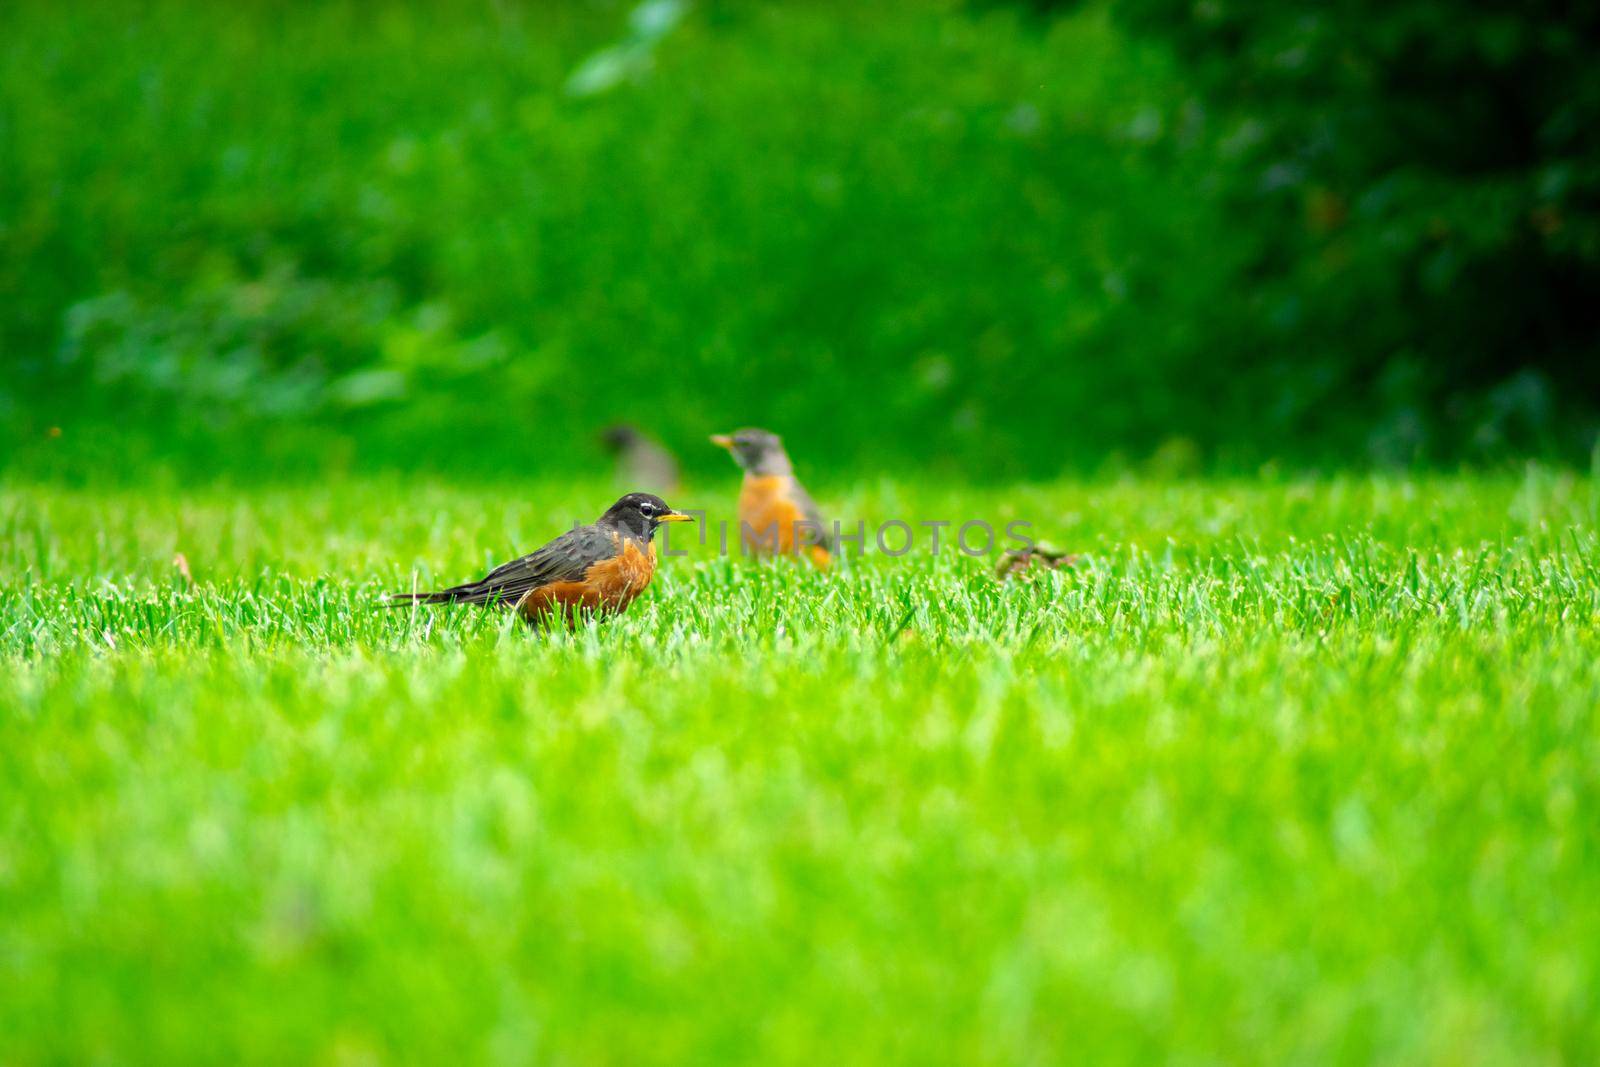 An American Robin in a Field of Grass by bju12290